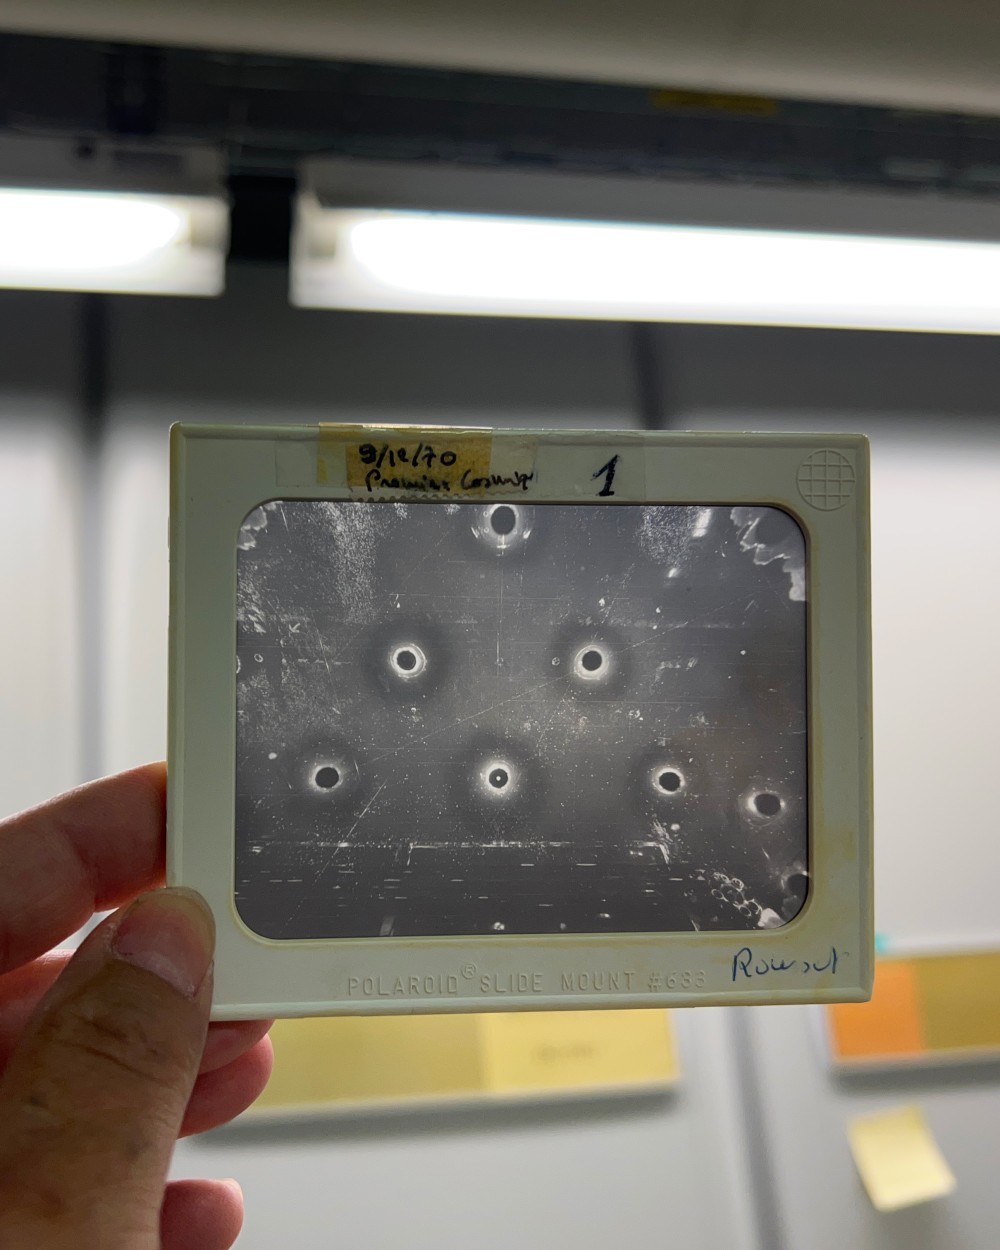 Photograph of particle tracks seen in the Gargamelle bubble chamber from 1970 in the CERN's archives. Photo by Tania Candiani